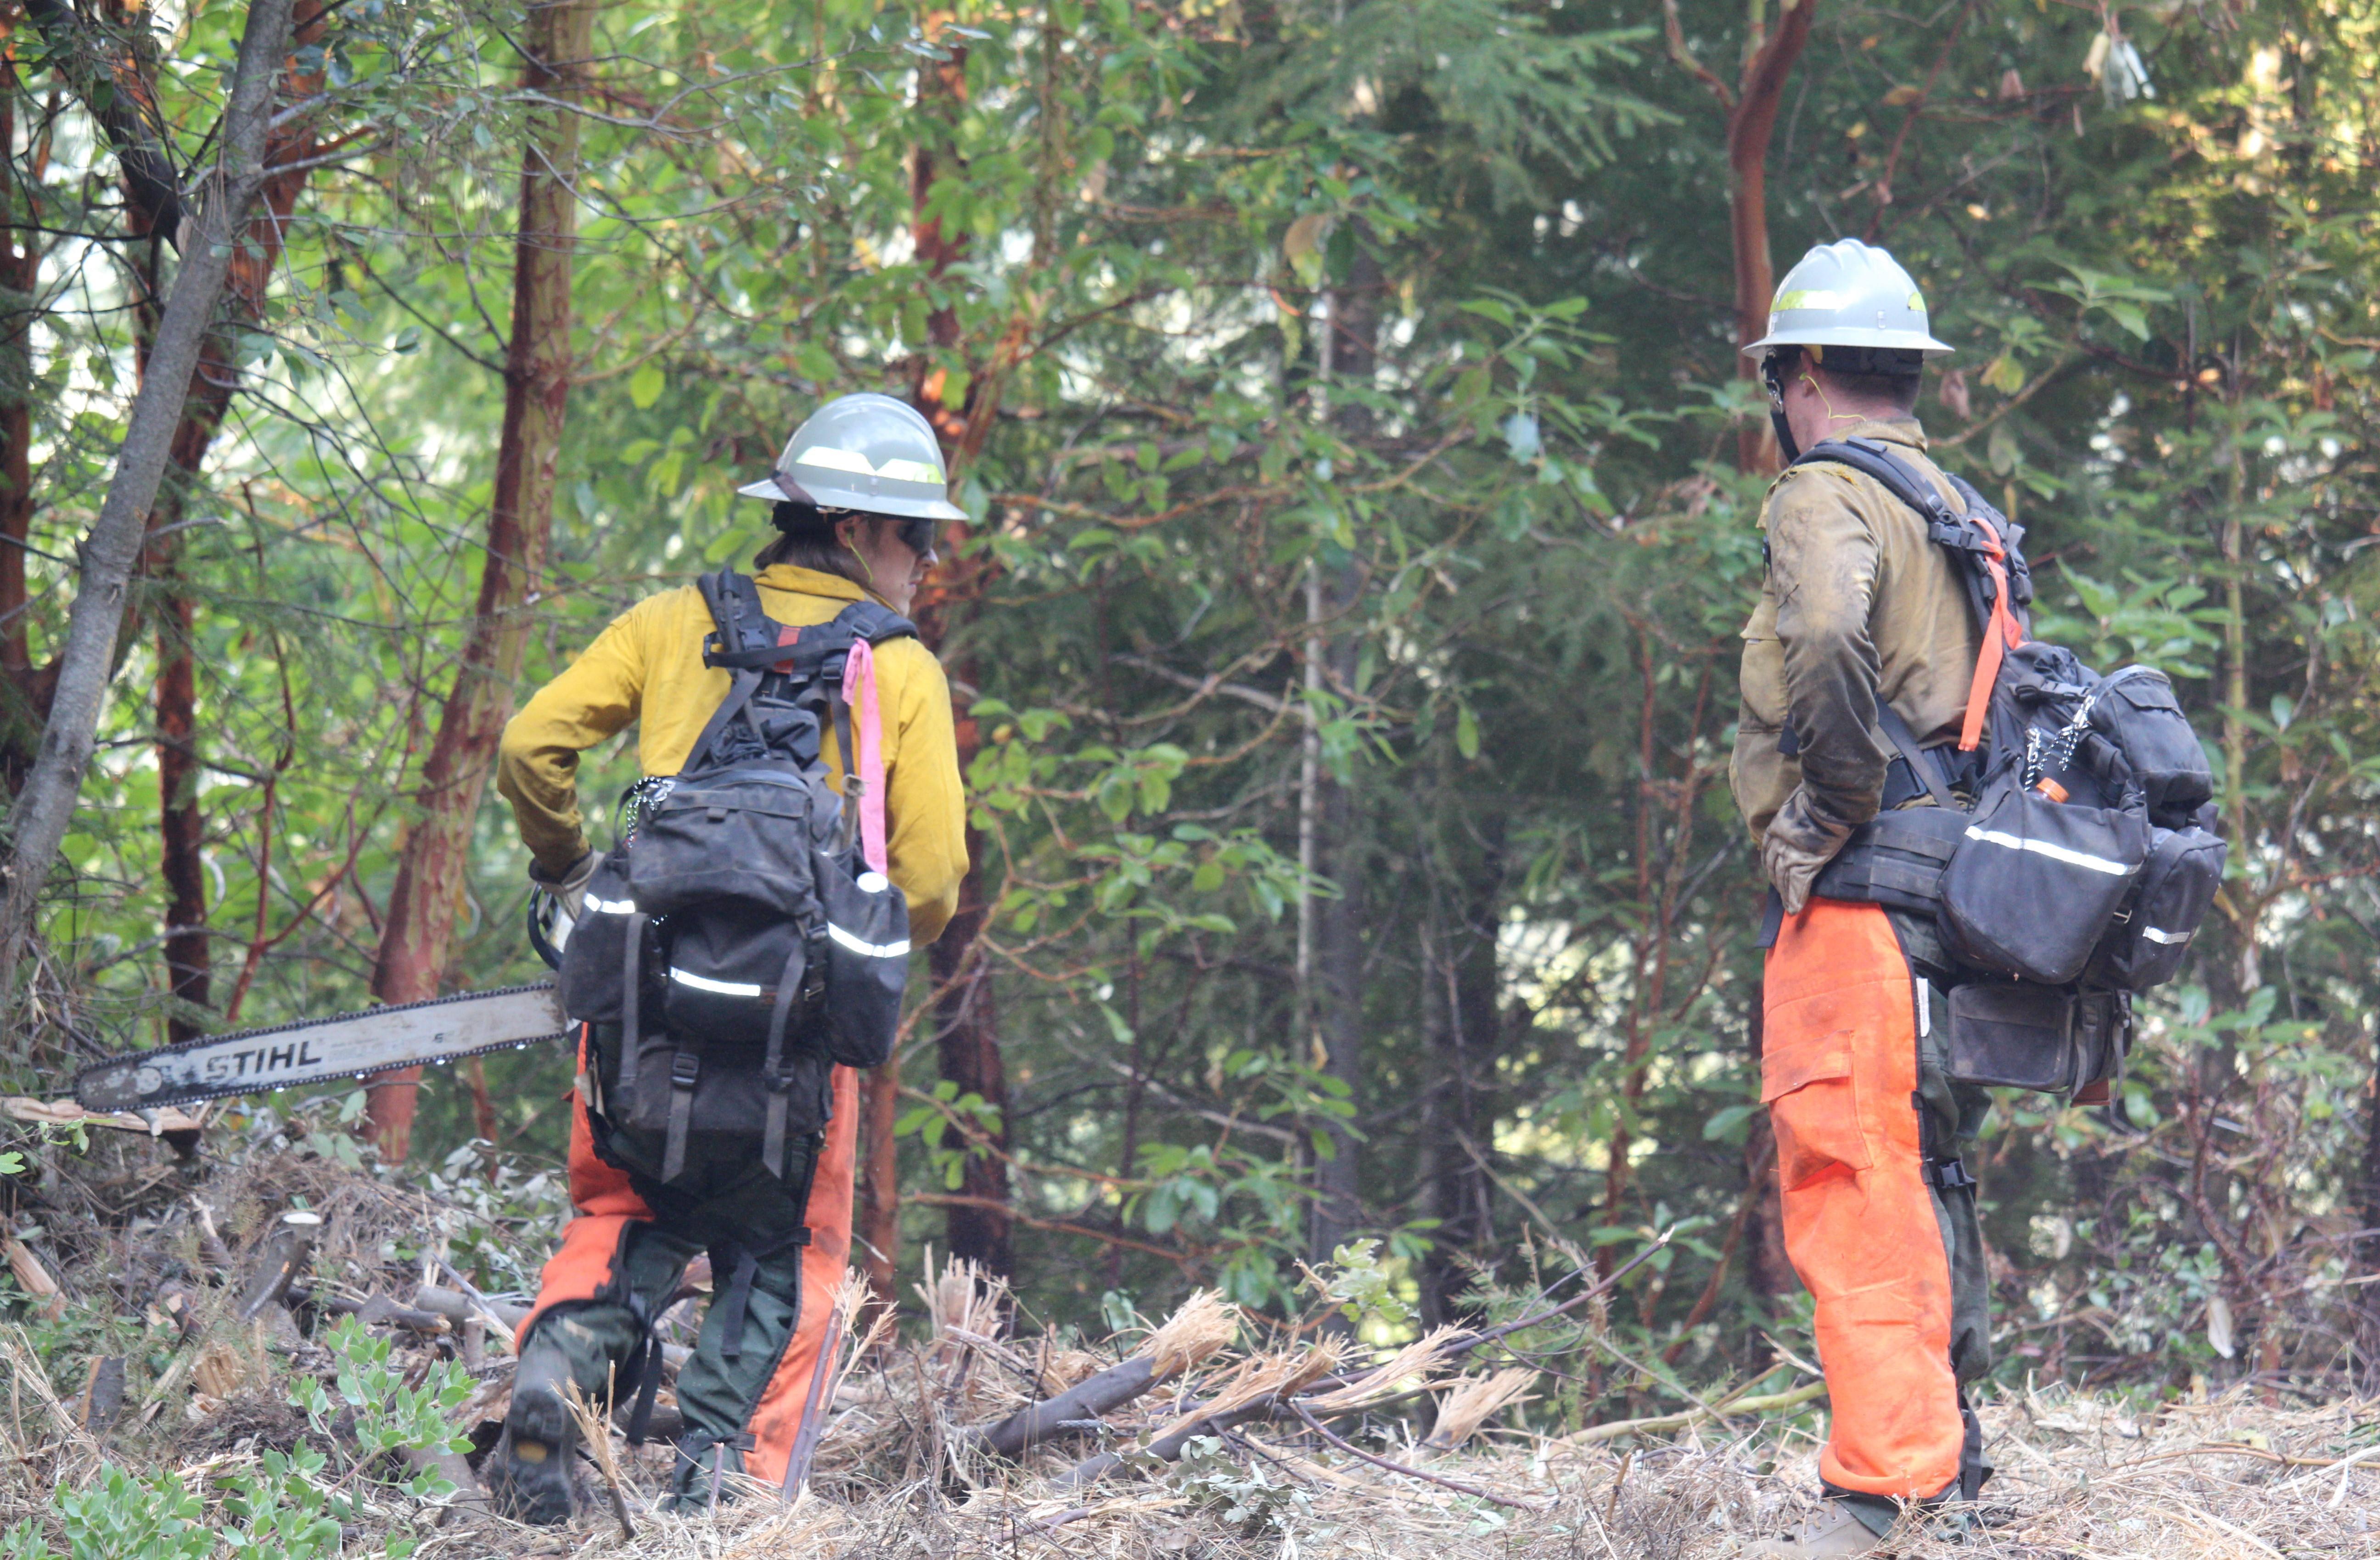 Two firefighters in wildfire gear, wearing orange chainsaw chaps, carrying a chainsaw and tree cutting equipment